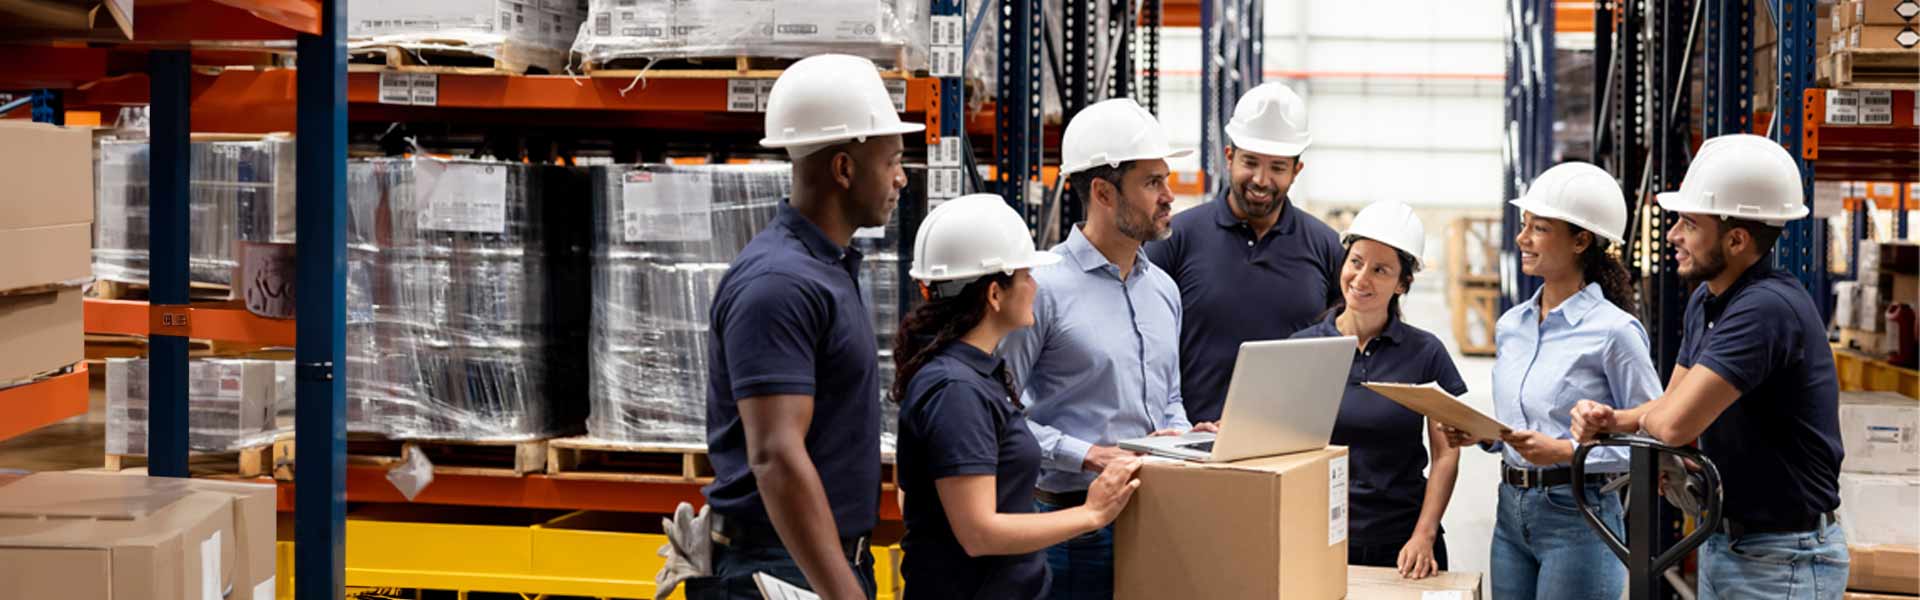 Supply chain management workers wearing white hardhats in a warehouse